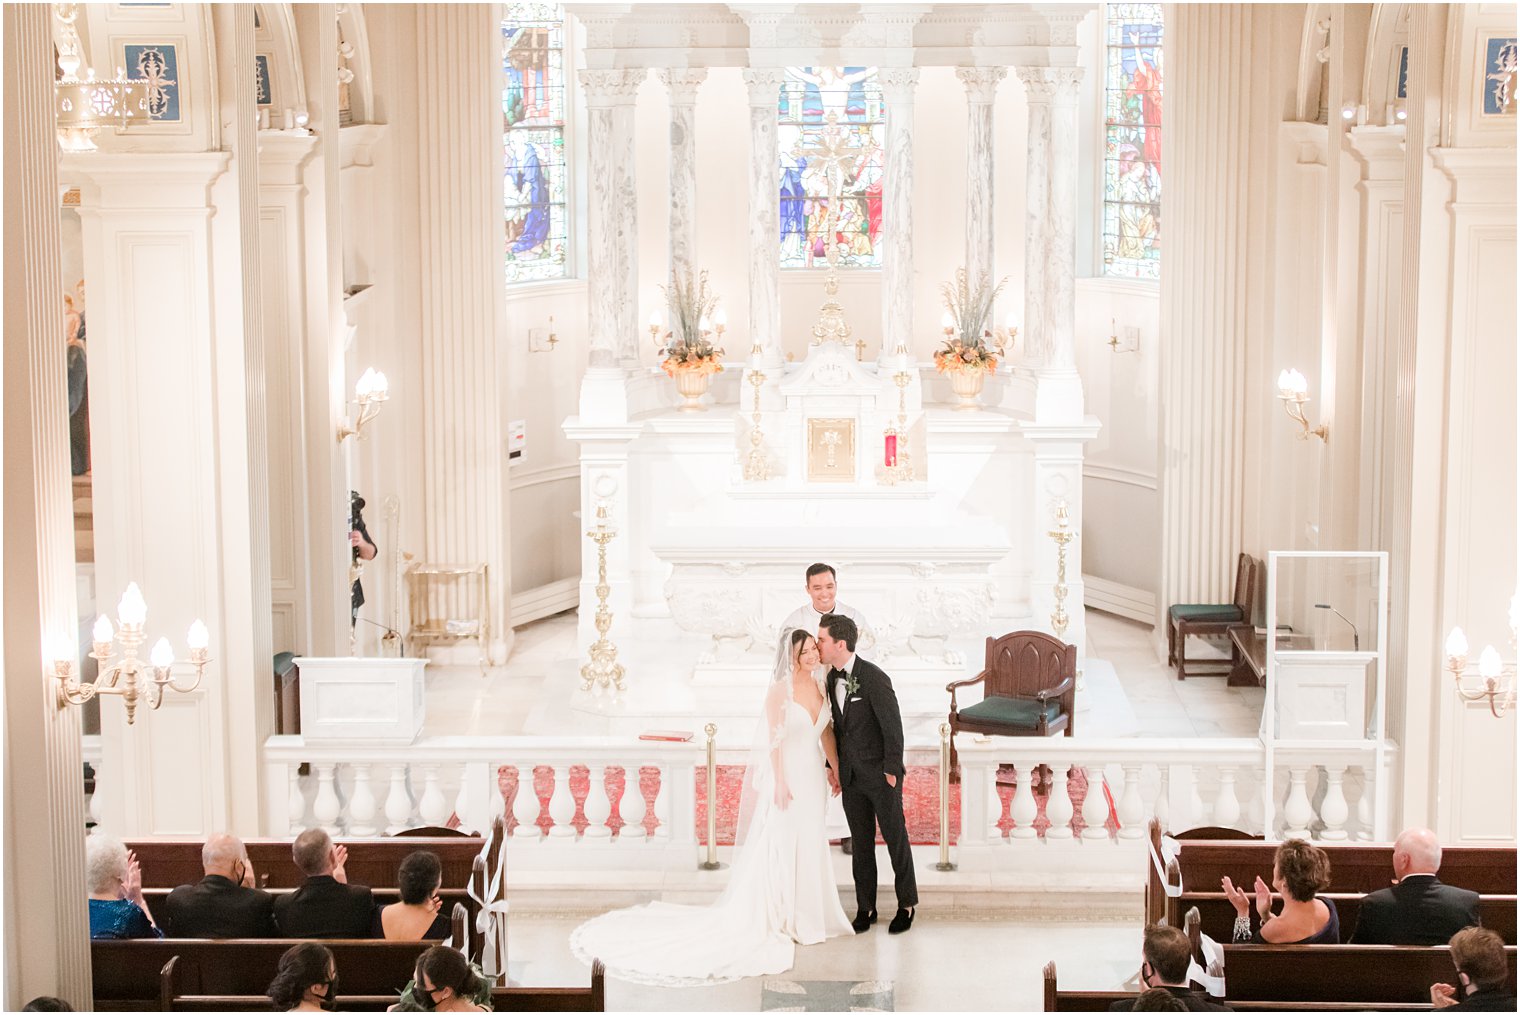 groom kisses bride's cheek during traditional church wedding at St. Catharine's Church in Spring Lake NJ